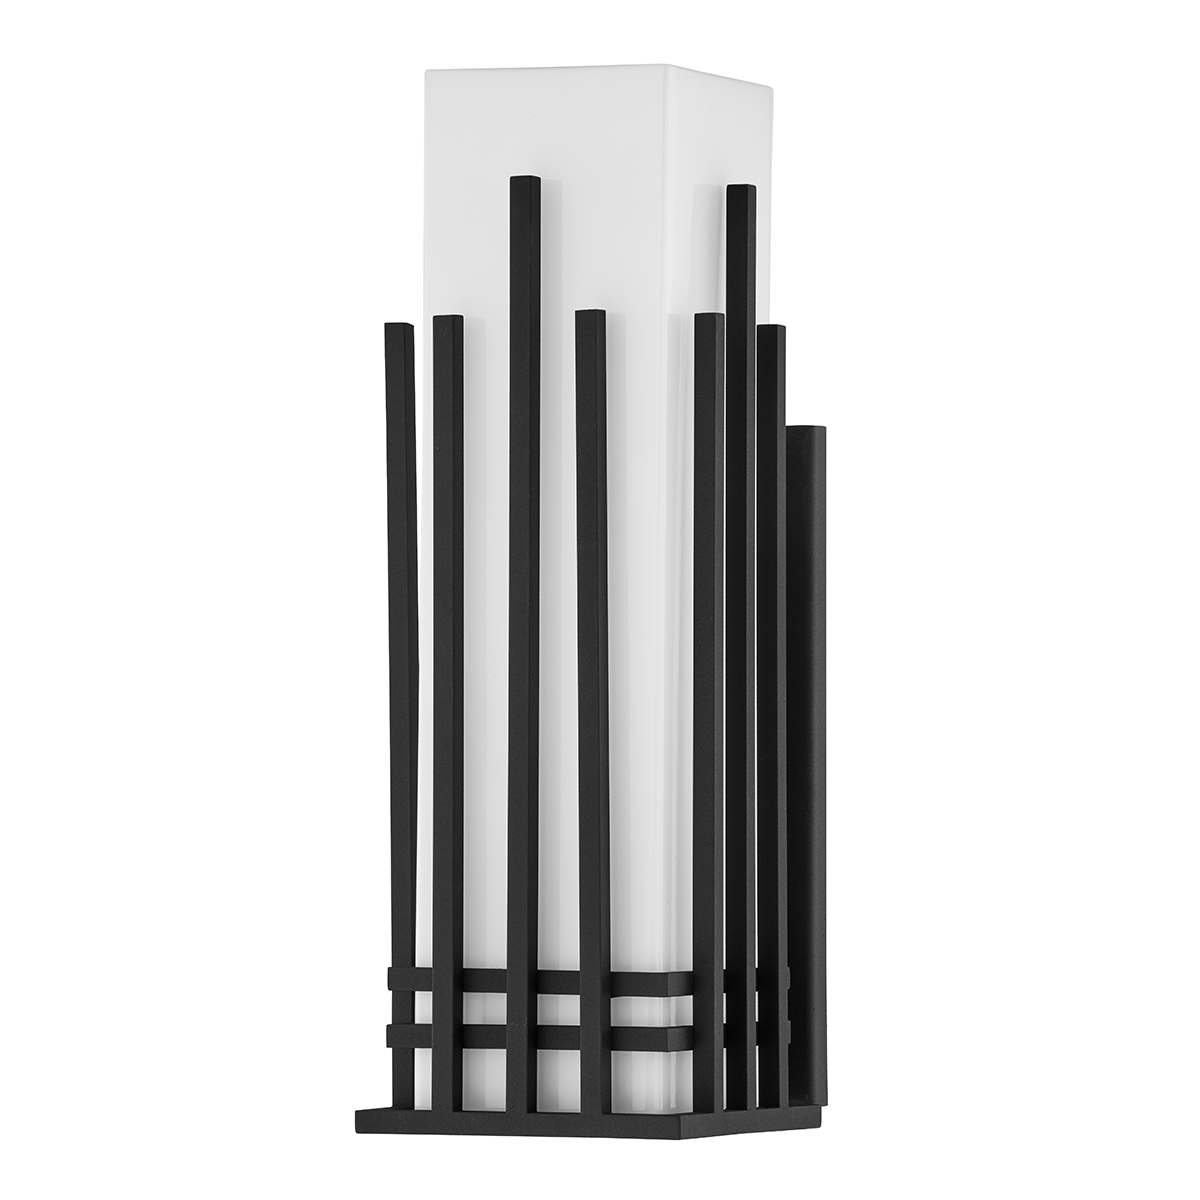 Troy Lighting 3 LIGHT LARGE EXTERIOR WALL SCONCE B5413 Outdoor l Wall Troy Lighting TEXTURED BLACK  